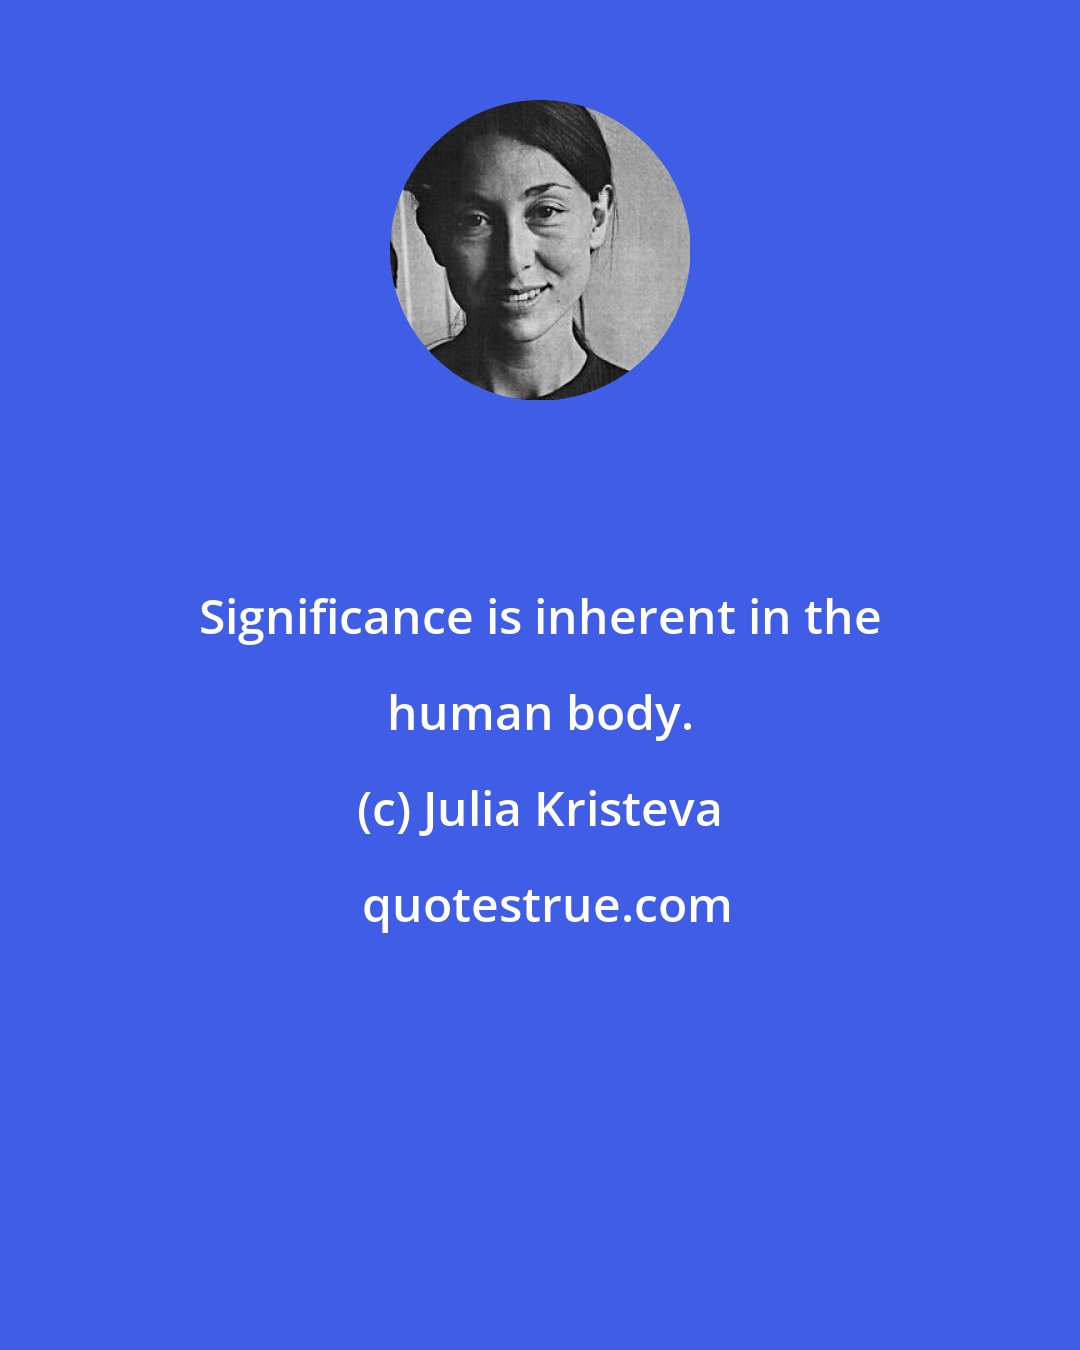 Julia Kristeva: Significance is inherent in the human body.